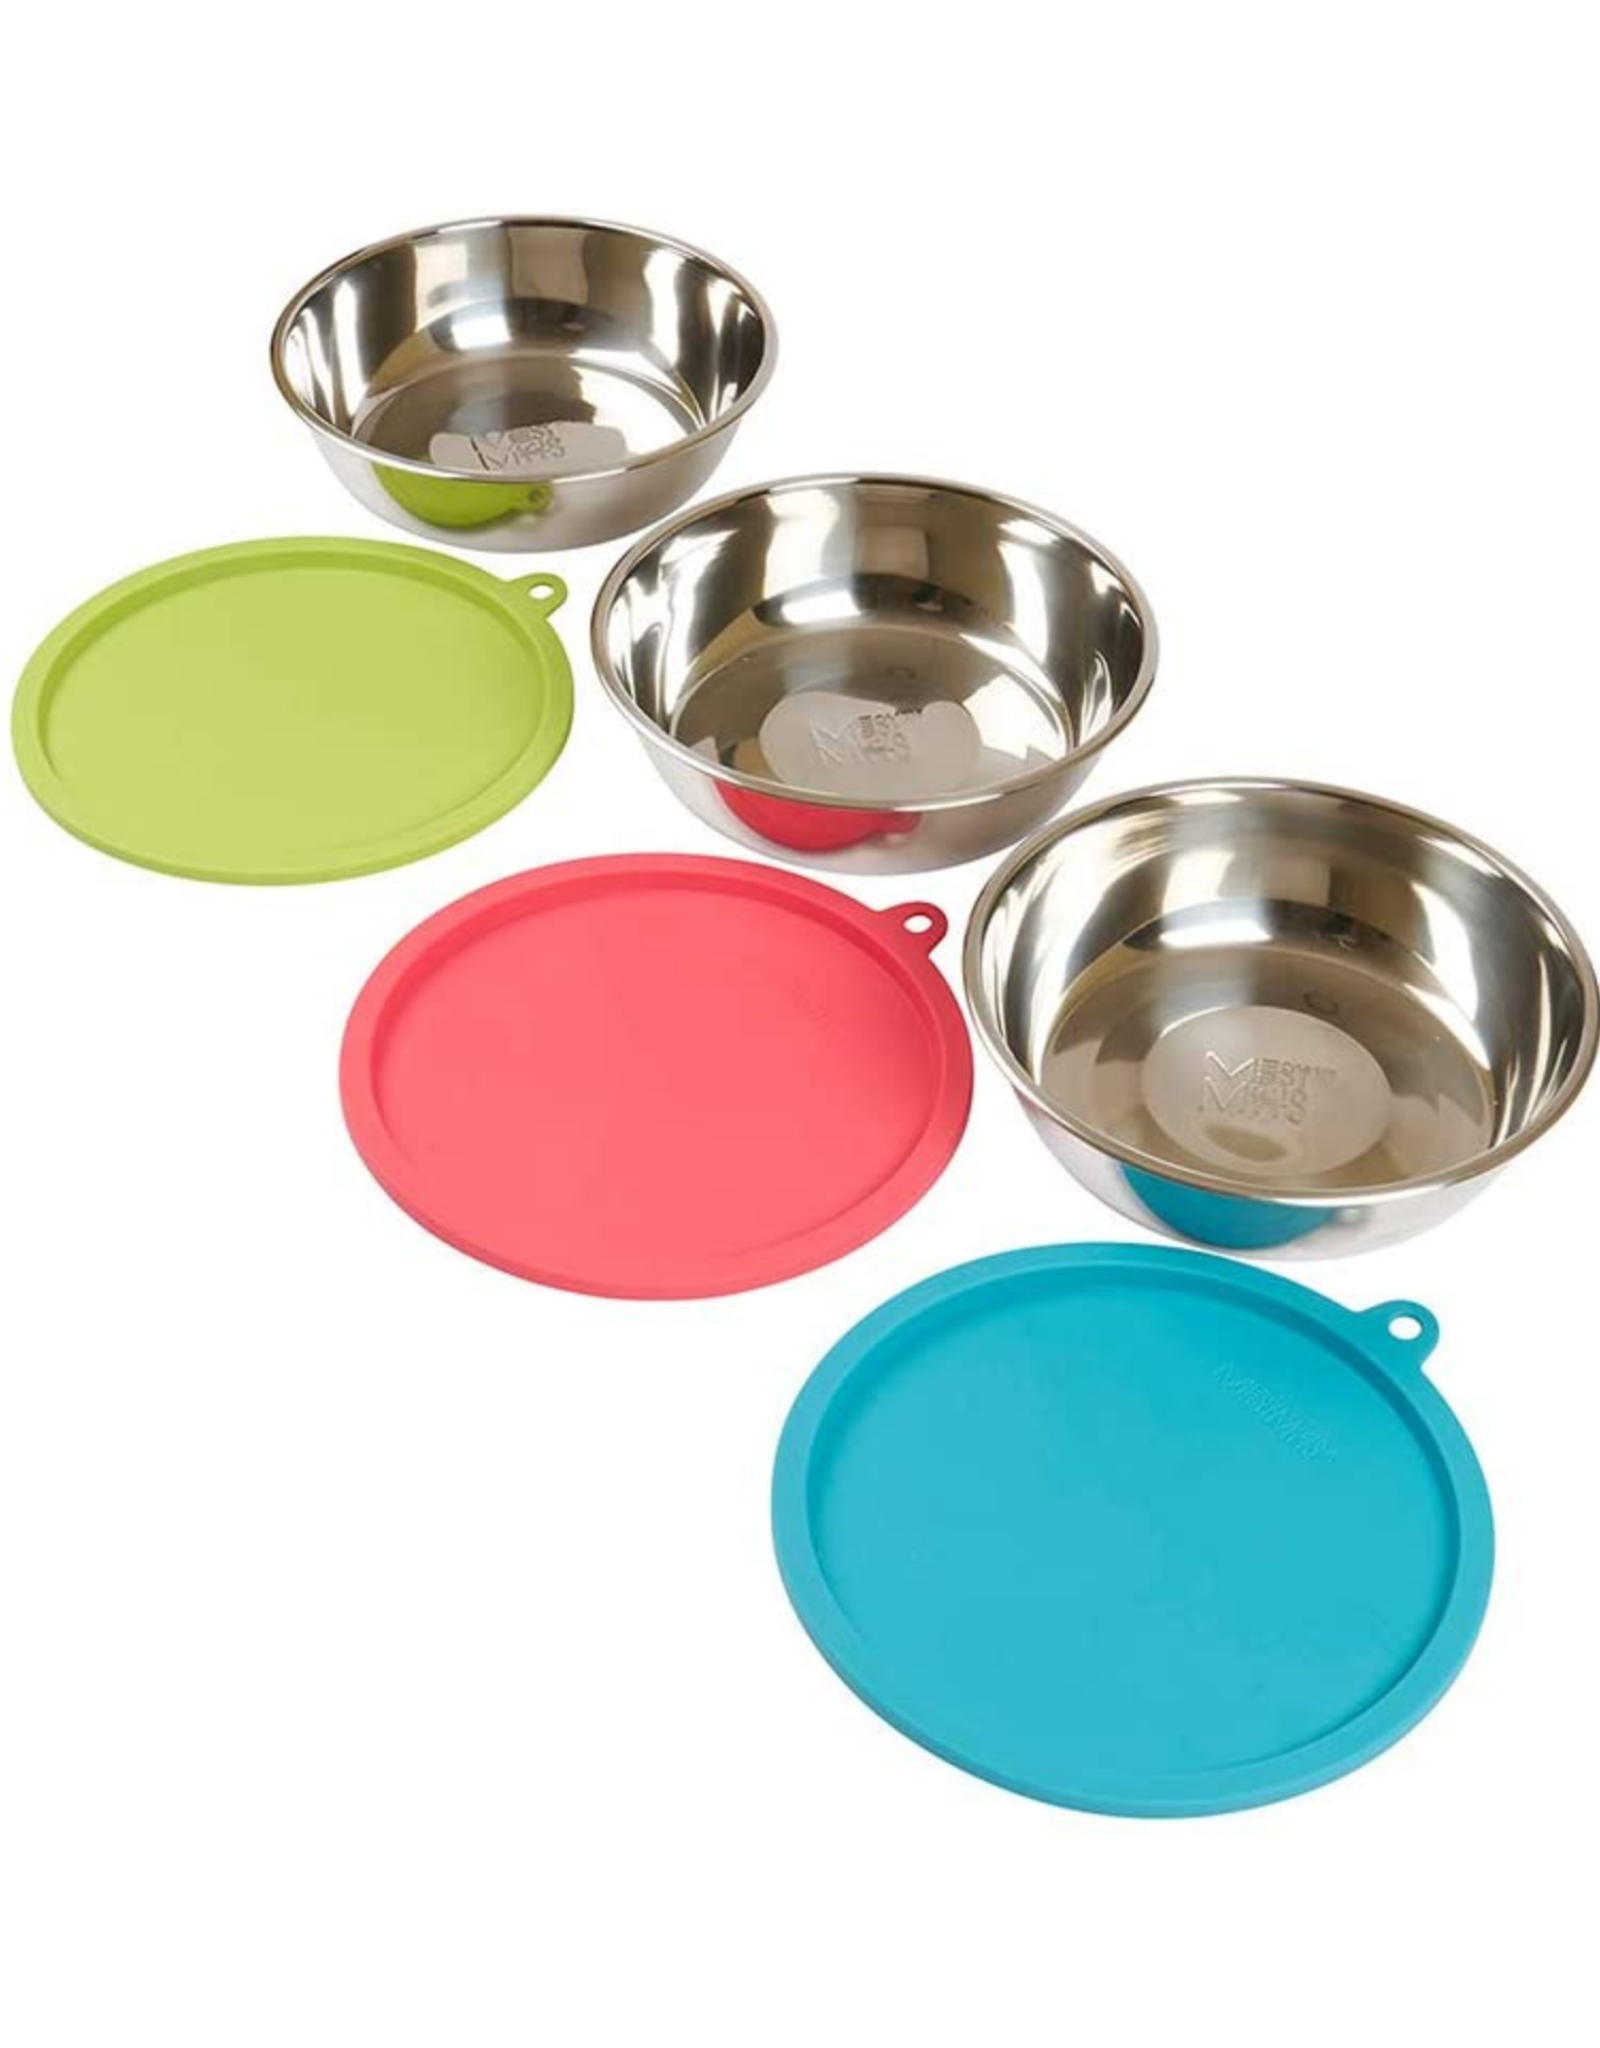 Messy Mutts Messy Mutts Bowls with Lids Large Set of 3